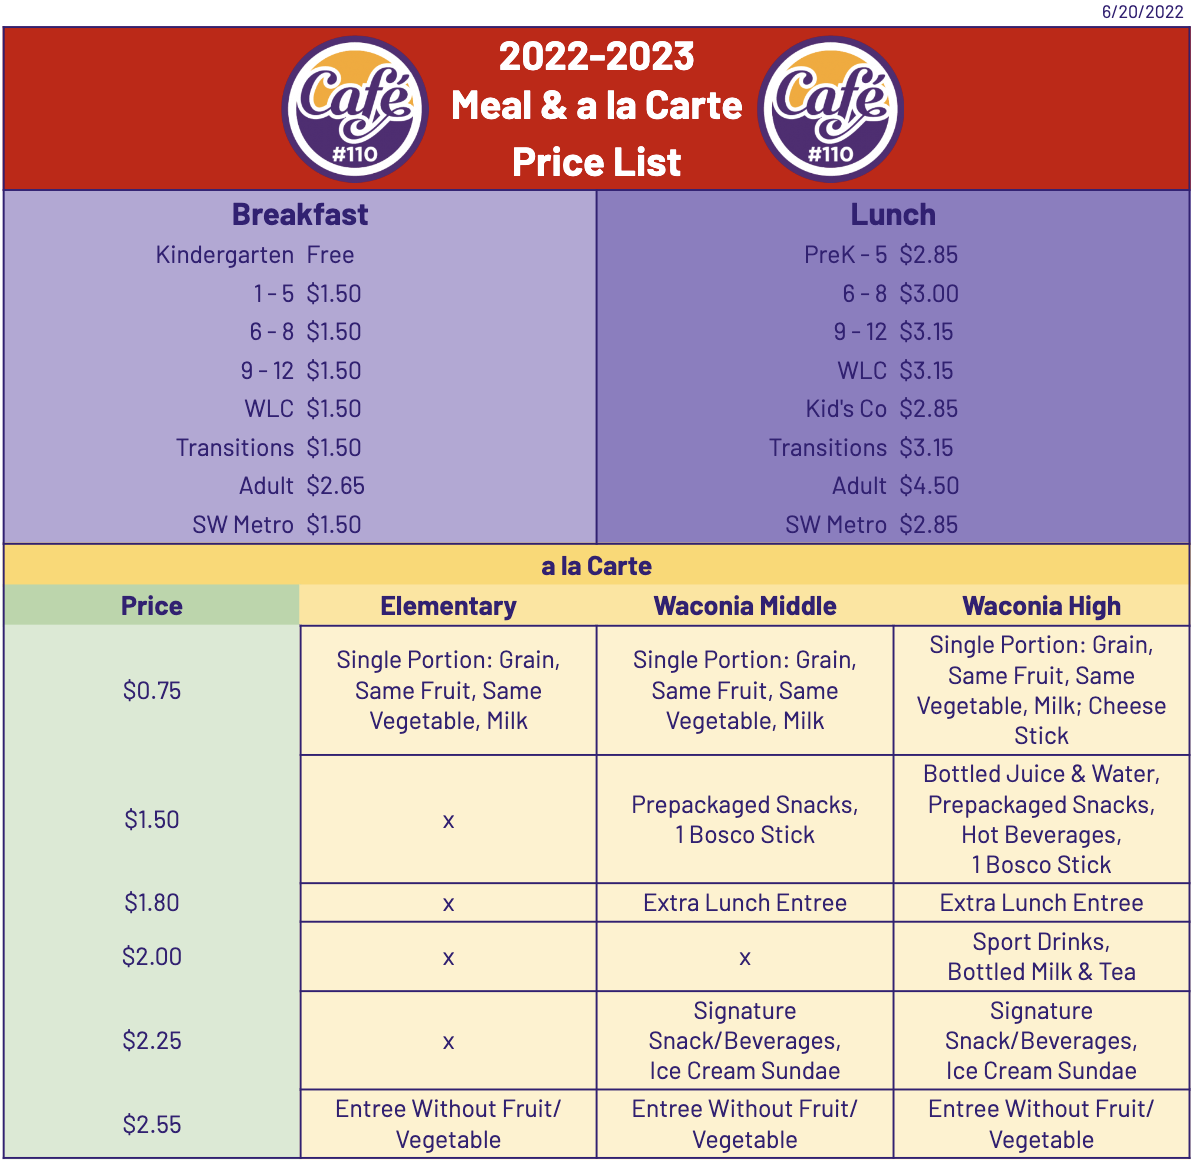 Cafe #110 2022-2023 Pricing